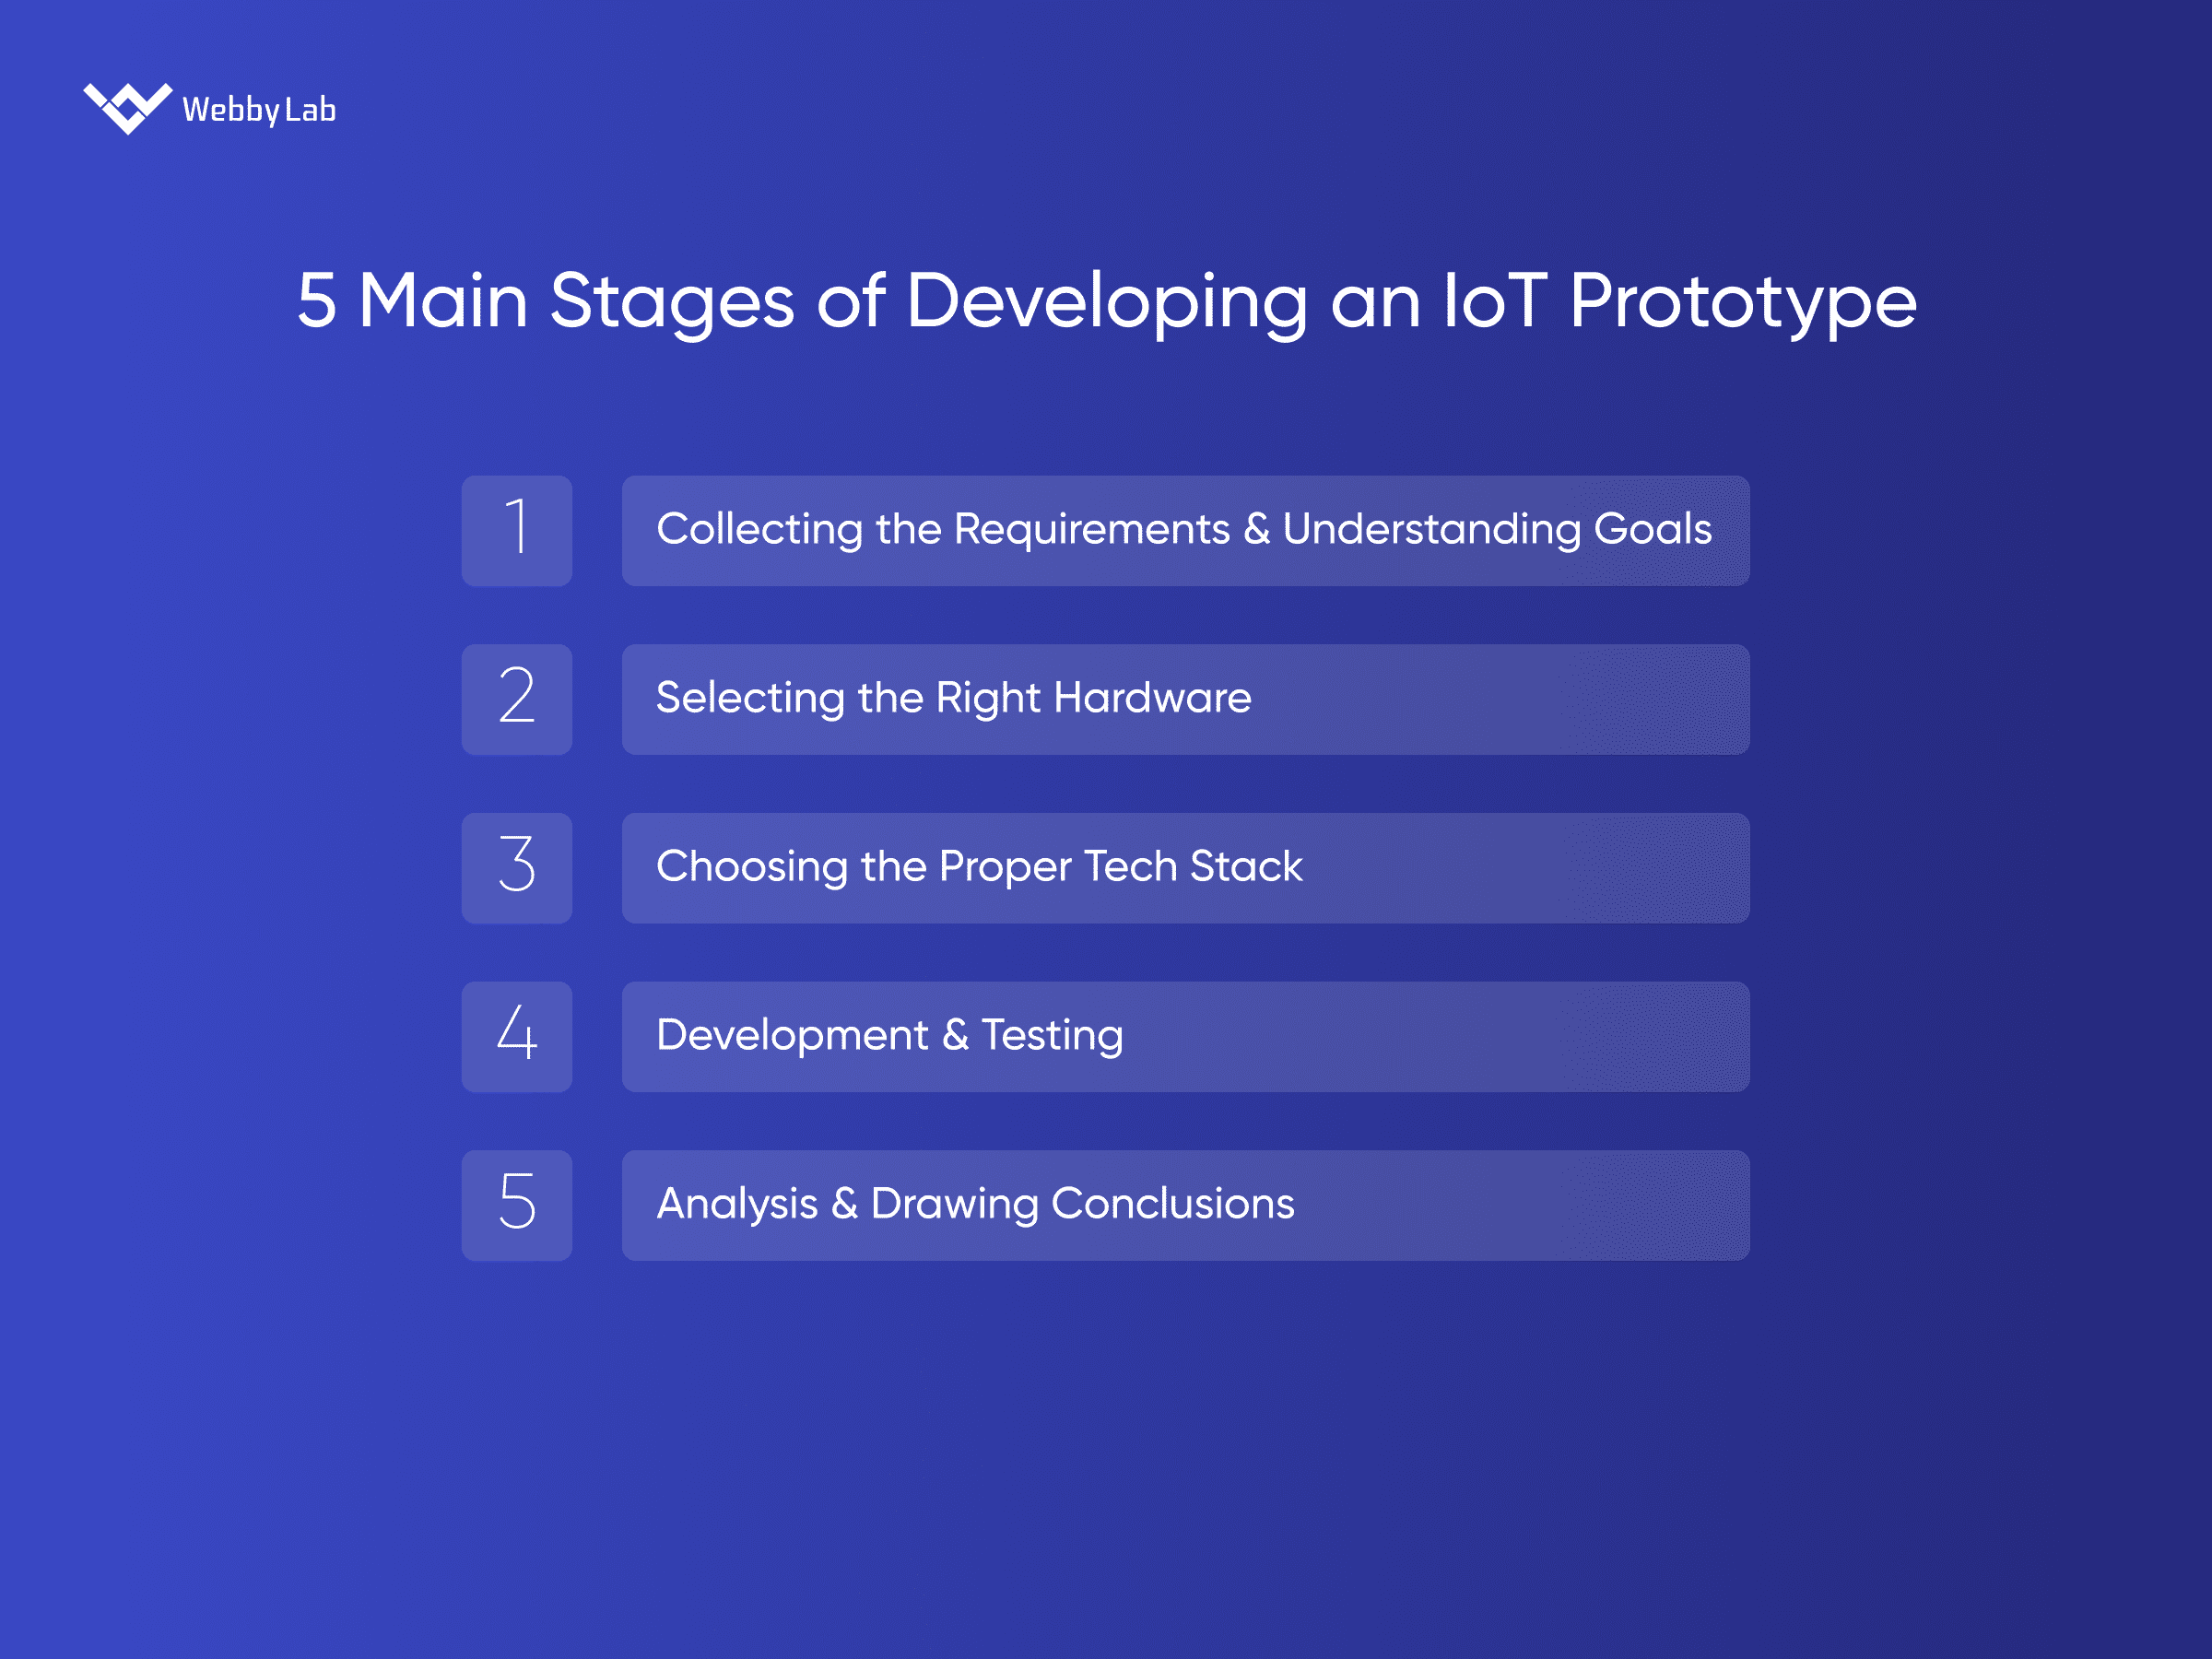 5 Main Stages of Developing an IoT Prototype